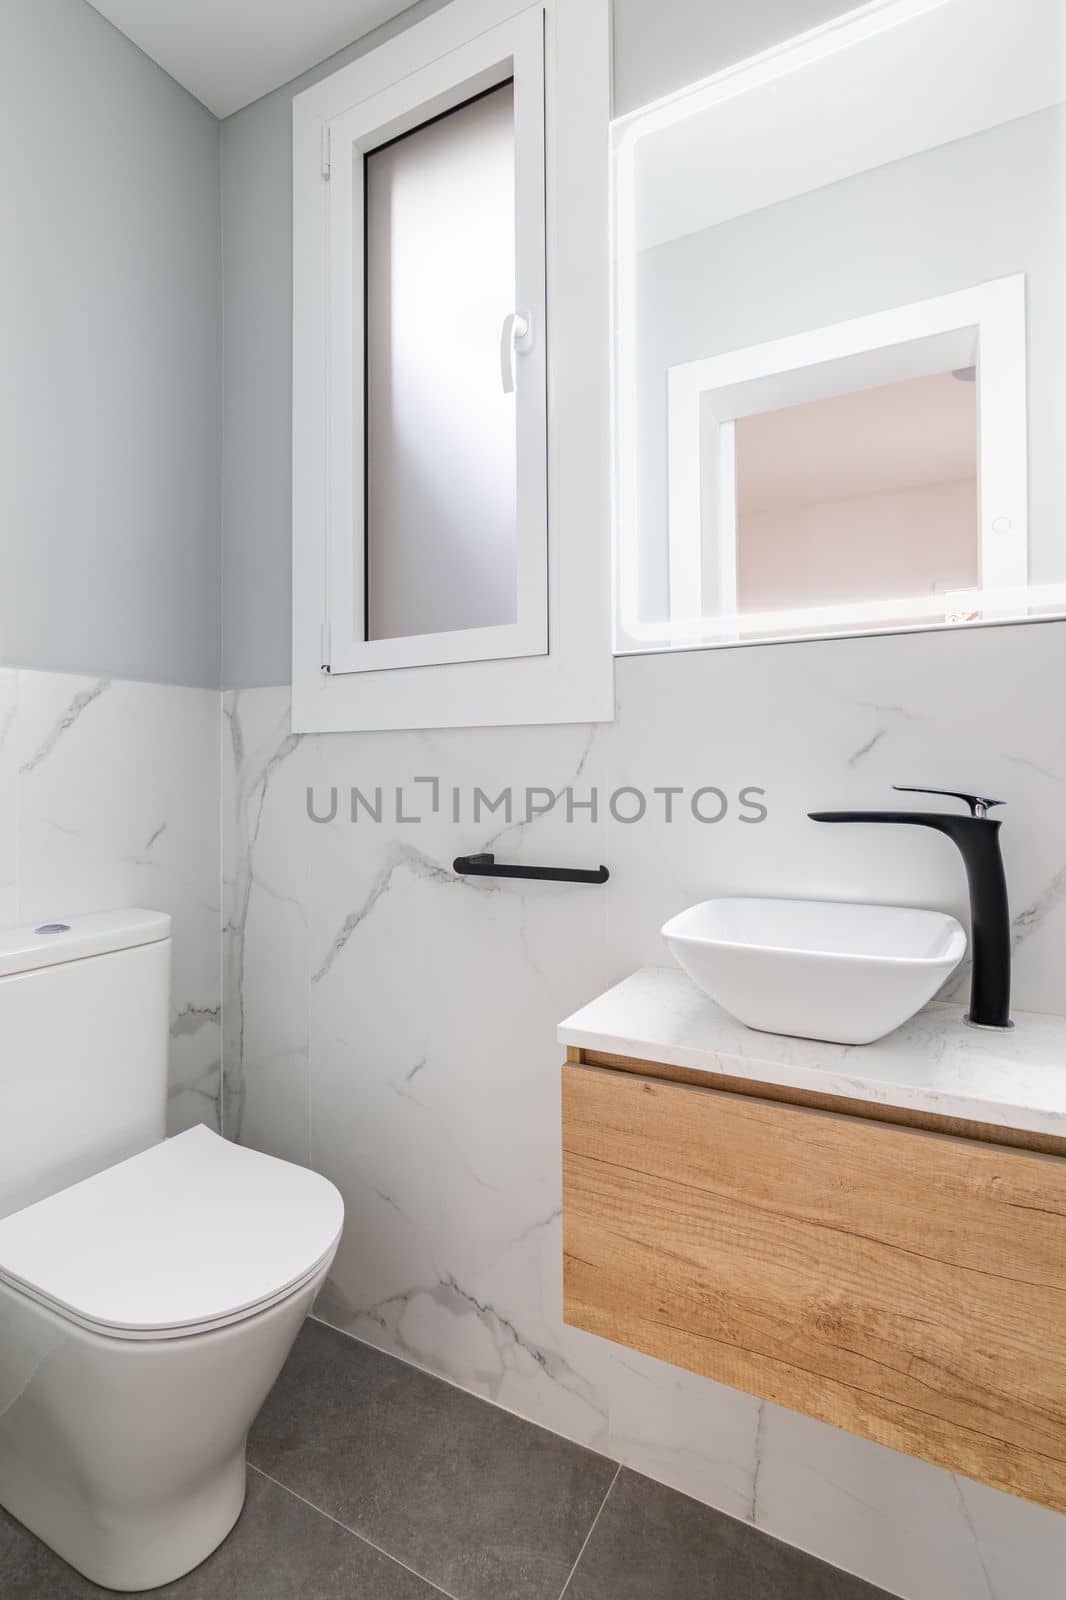 Small bathroom with toilet and designer sink on small vanity with black faucet. Walls of room are made of white natural marble tiles. Square mirror is illuminated with fluorescent light. by apavlin